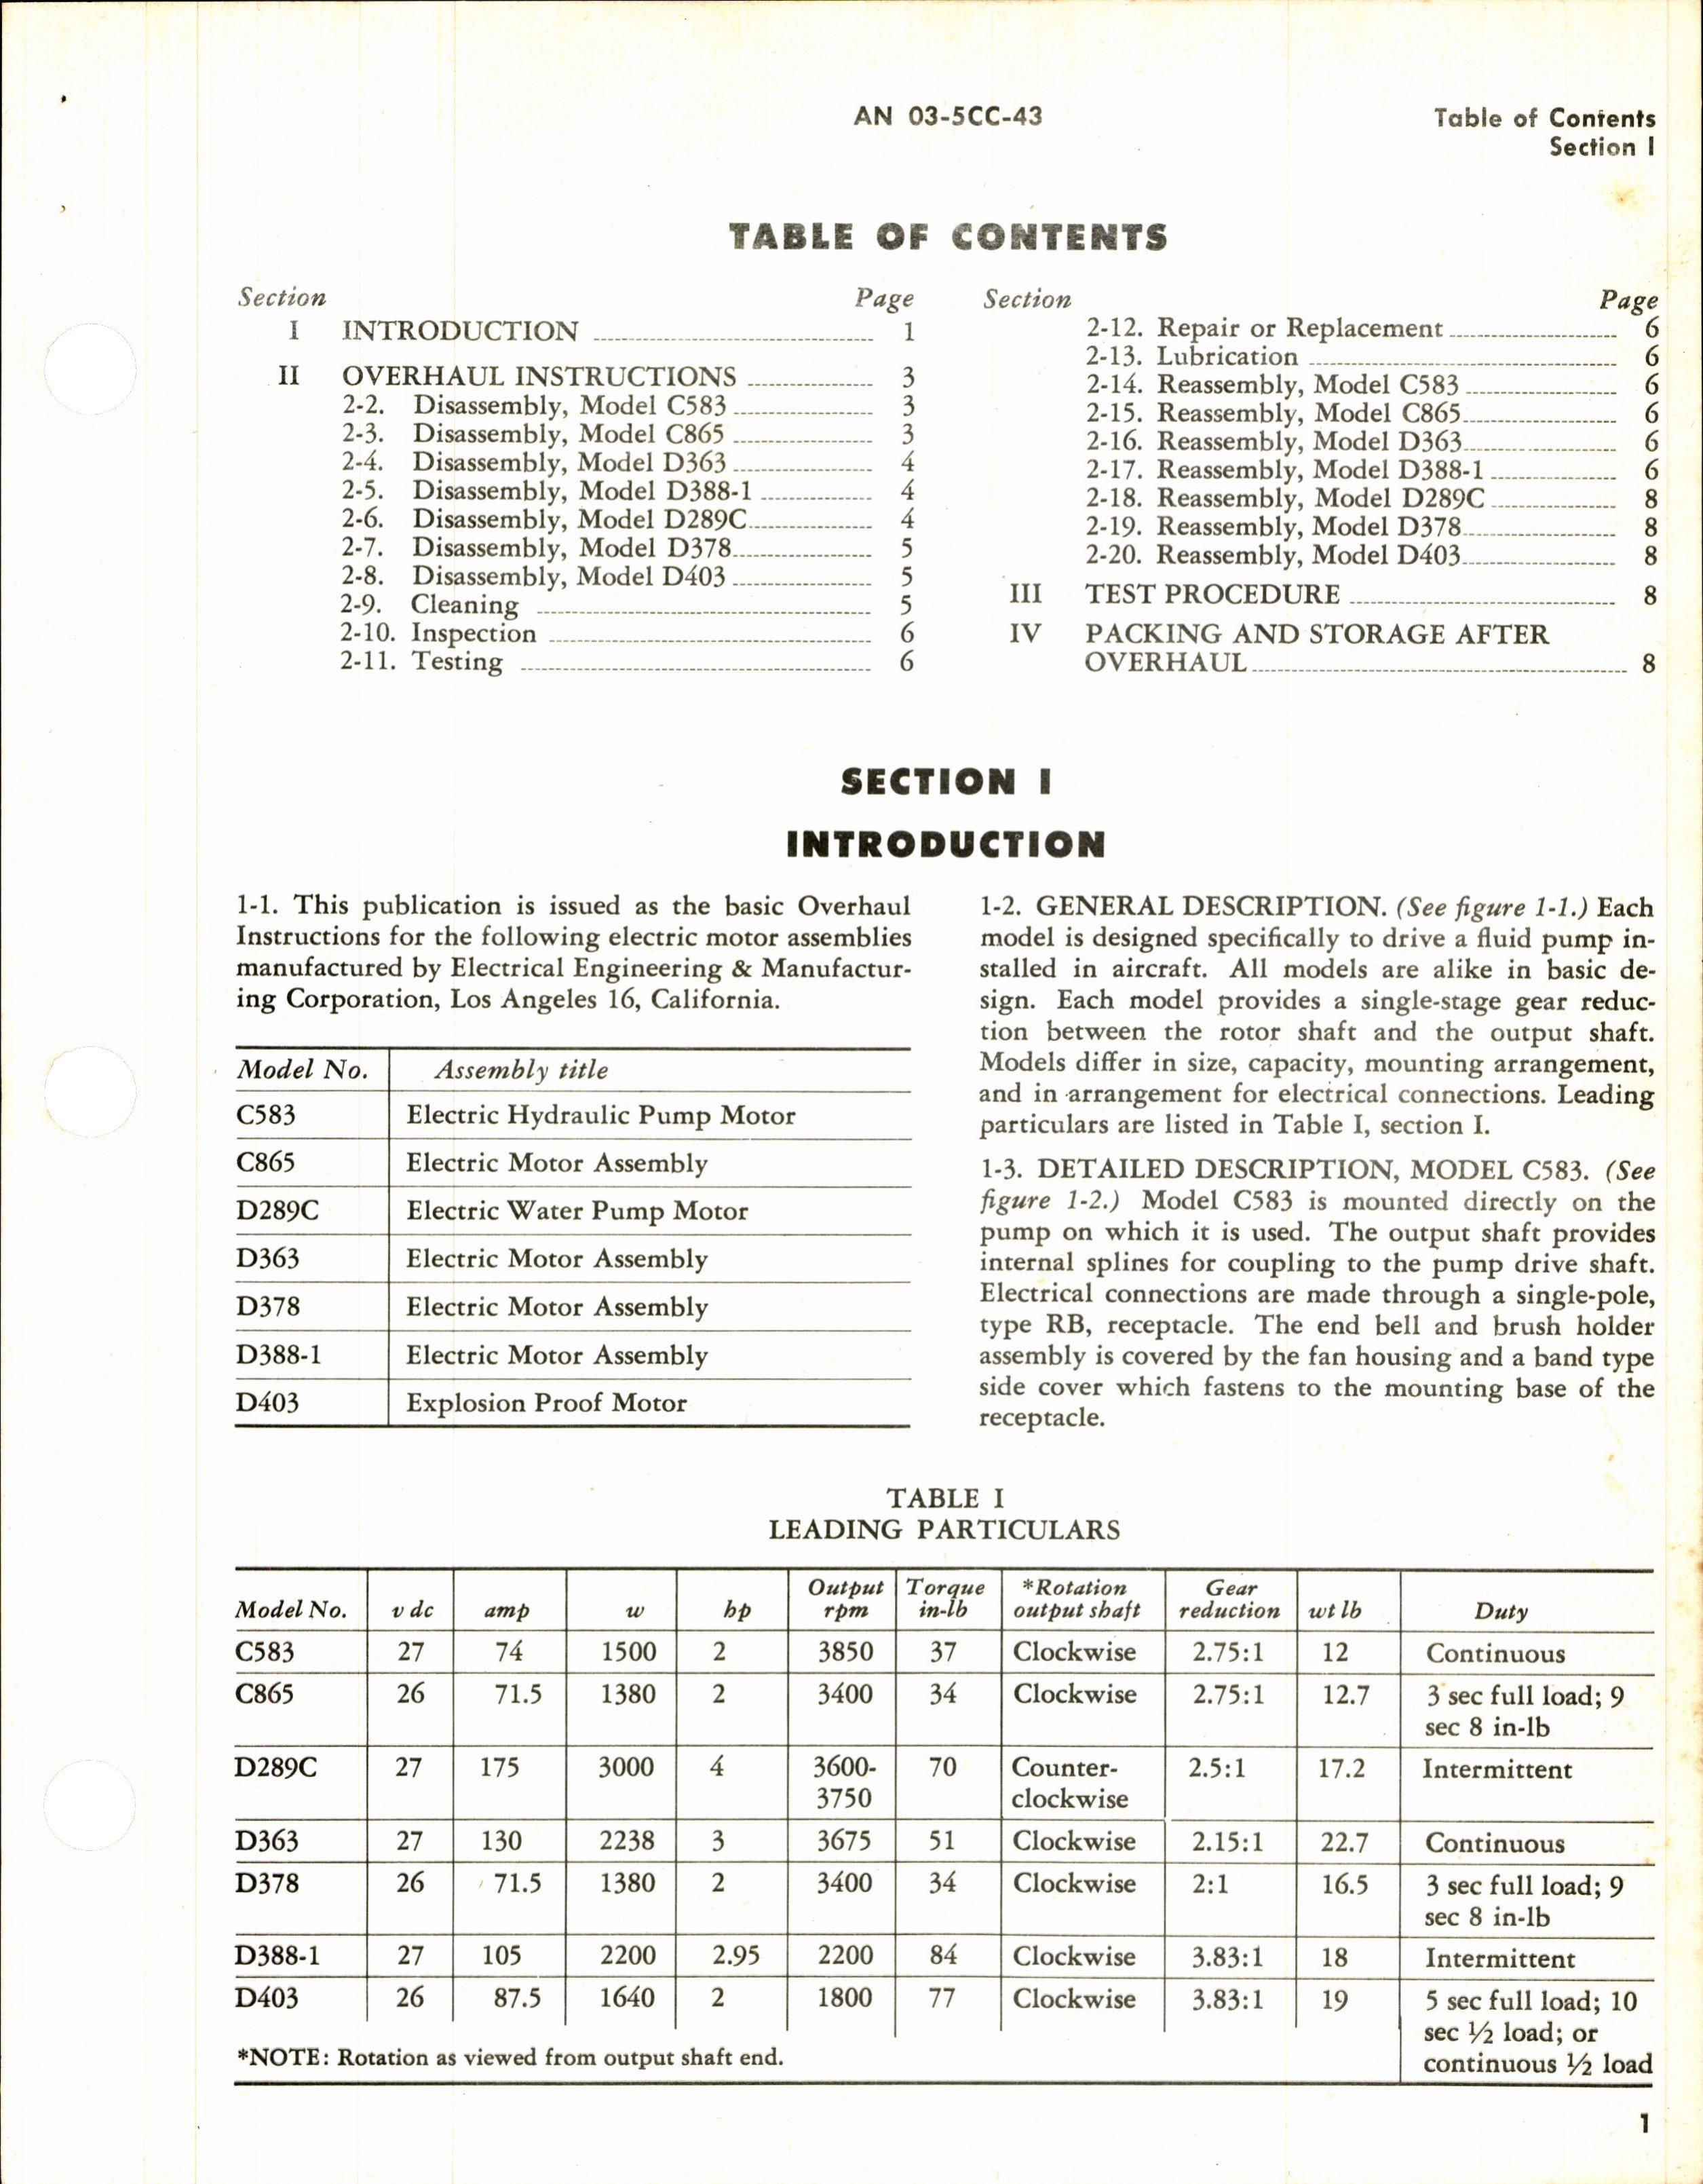 Sample page 5 from AirCorps Library document: Overhaul Instructions for Electrical Engineering & Mfg. Co. Electric Motors